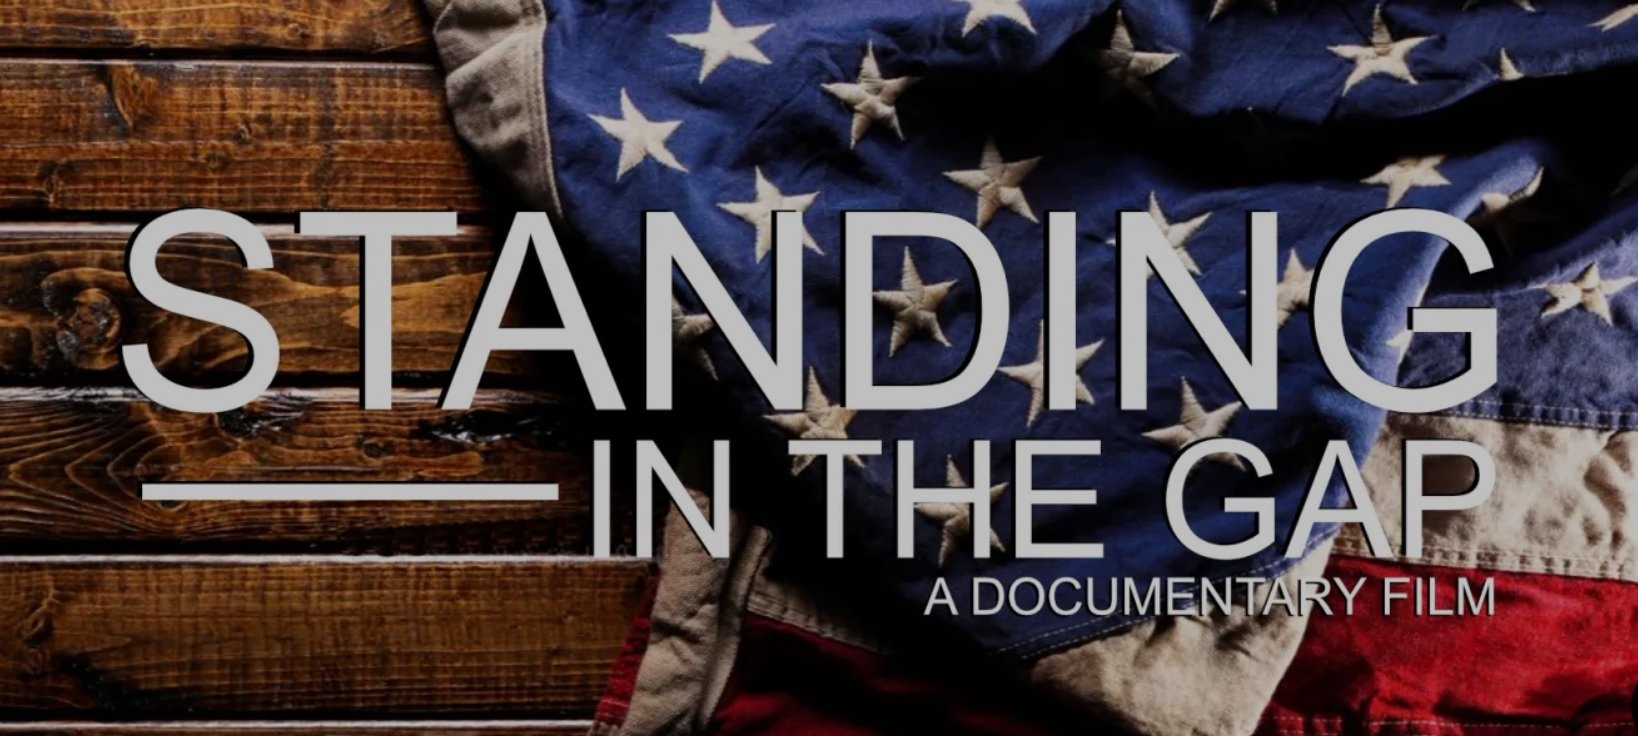 New Documentary “Standing In the Gap” Discusses How Our Votes Have Been Stolen and Manipulated for Decades